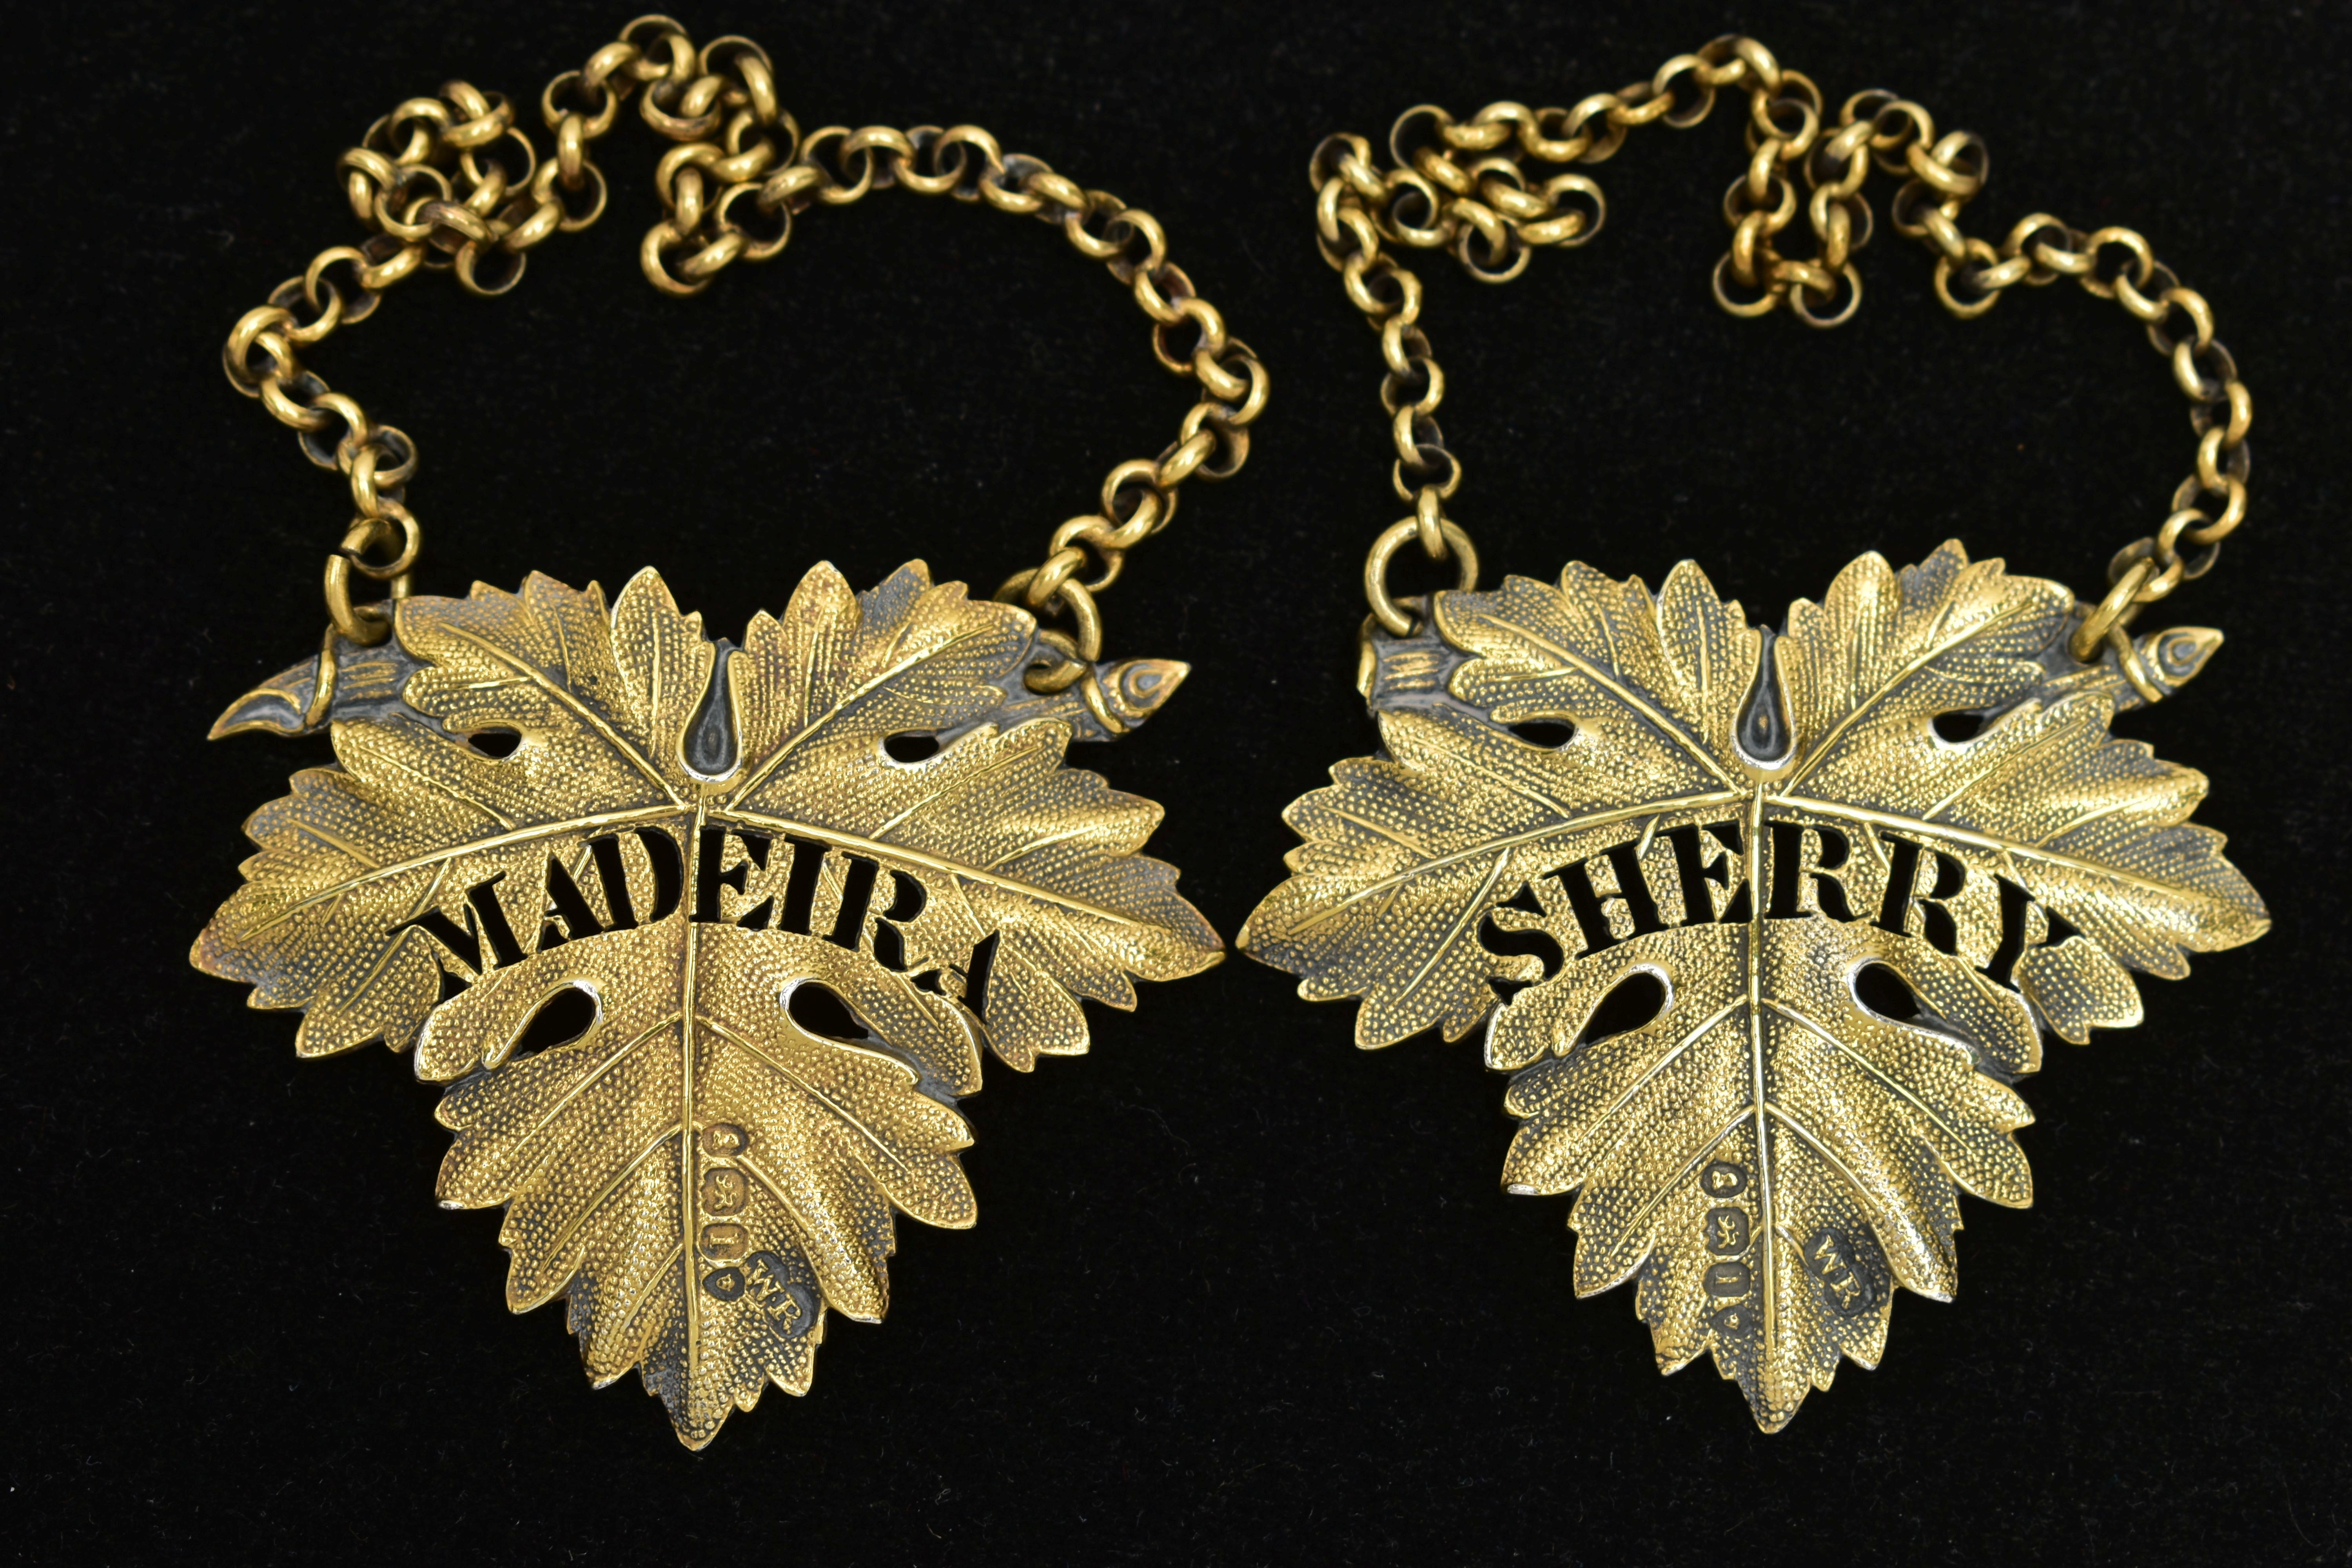 A PAIR OF GEORGE IV SILVER GILT DECANTER LABELS, cast as vine leaves, named for 'SHERRY' and ' - Image 3 of 3